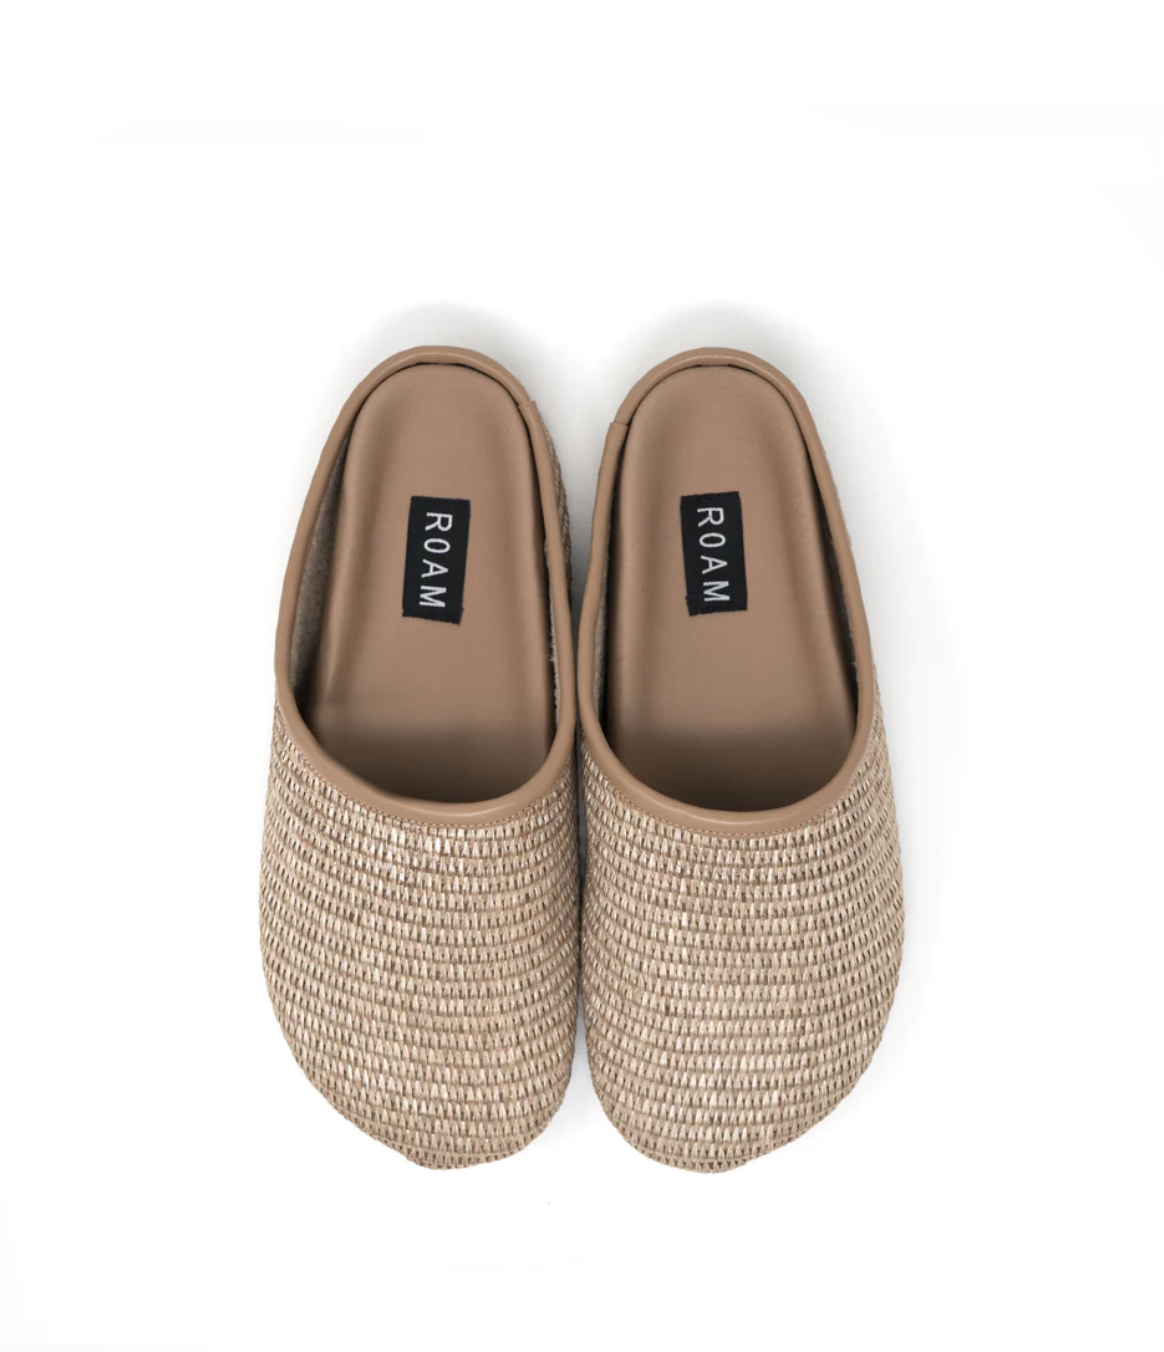 A pair of beige, Roam the Raffia Clog slip-on shoes with a woven exterior, seen from above on a white background. The shoes have the word &quot;ROAM&quot; printed on the insoles and are inspired by the relaxed lifestyle of Scottsdale, Arizona.